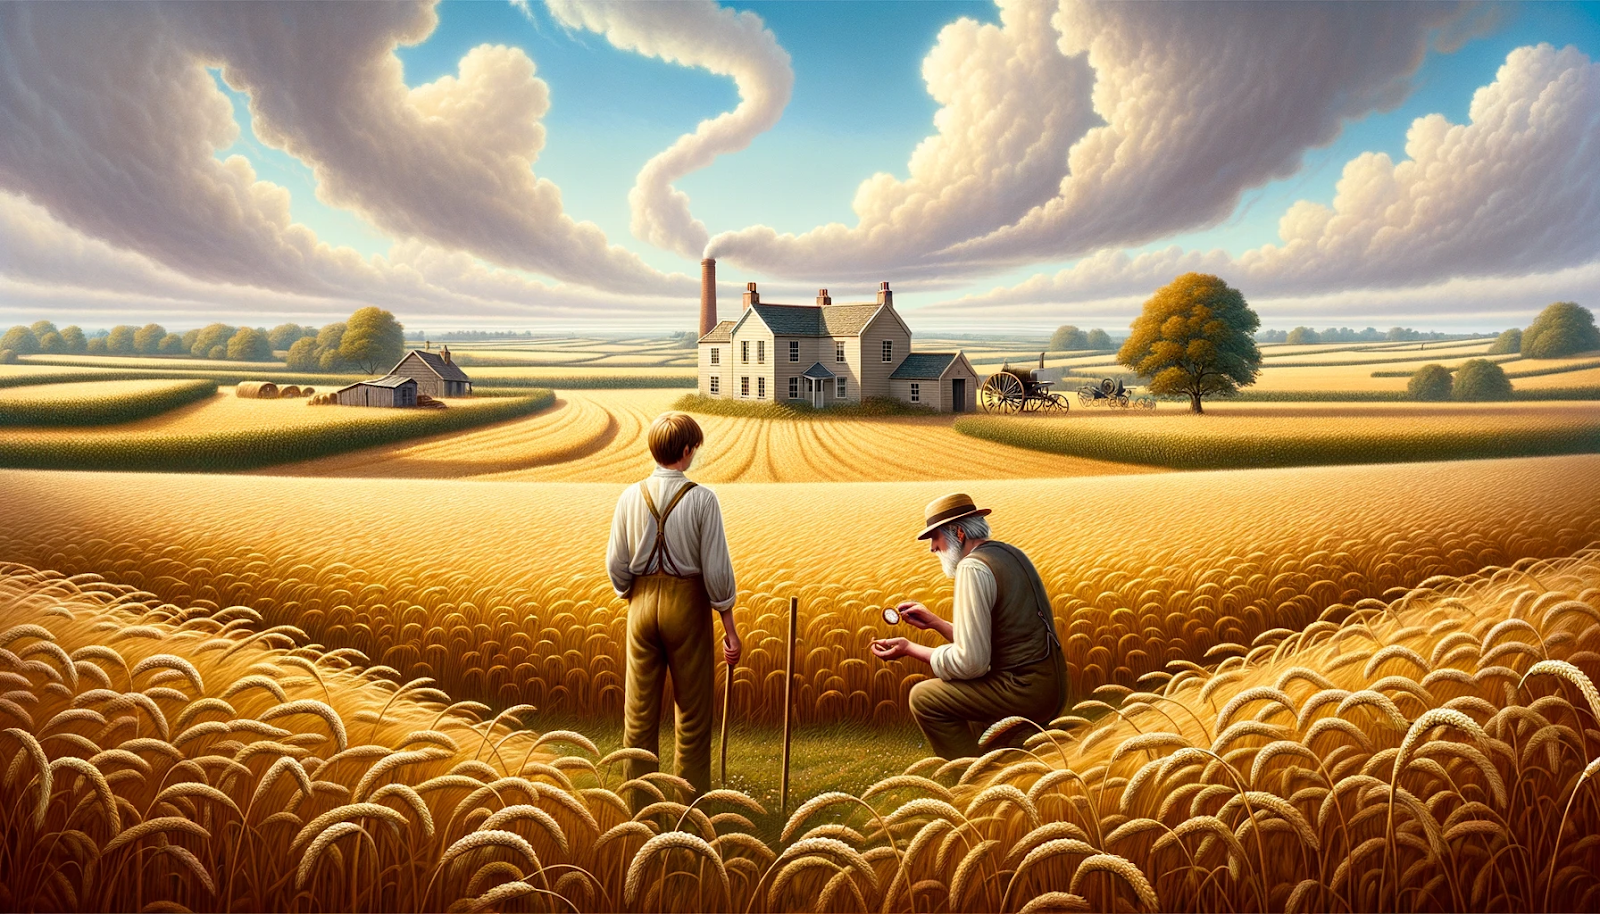 Illustration of a vast farmland under a clear blue sky. The golden crops sway gently with the breeze. In the distance, a humble cottage stands, with smoke spiraling from its chimney. Jenna approaches the cottage and meets Thomas, a middle-aged man diligently tilling the land. They converse, with the pocket watch prominently displayed between them, symbolizing the bond of family and resilience.